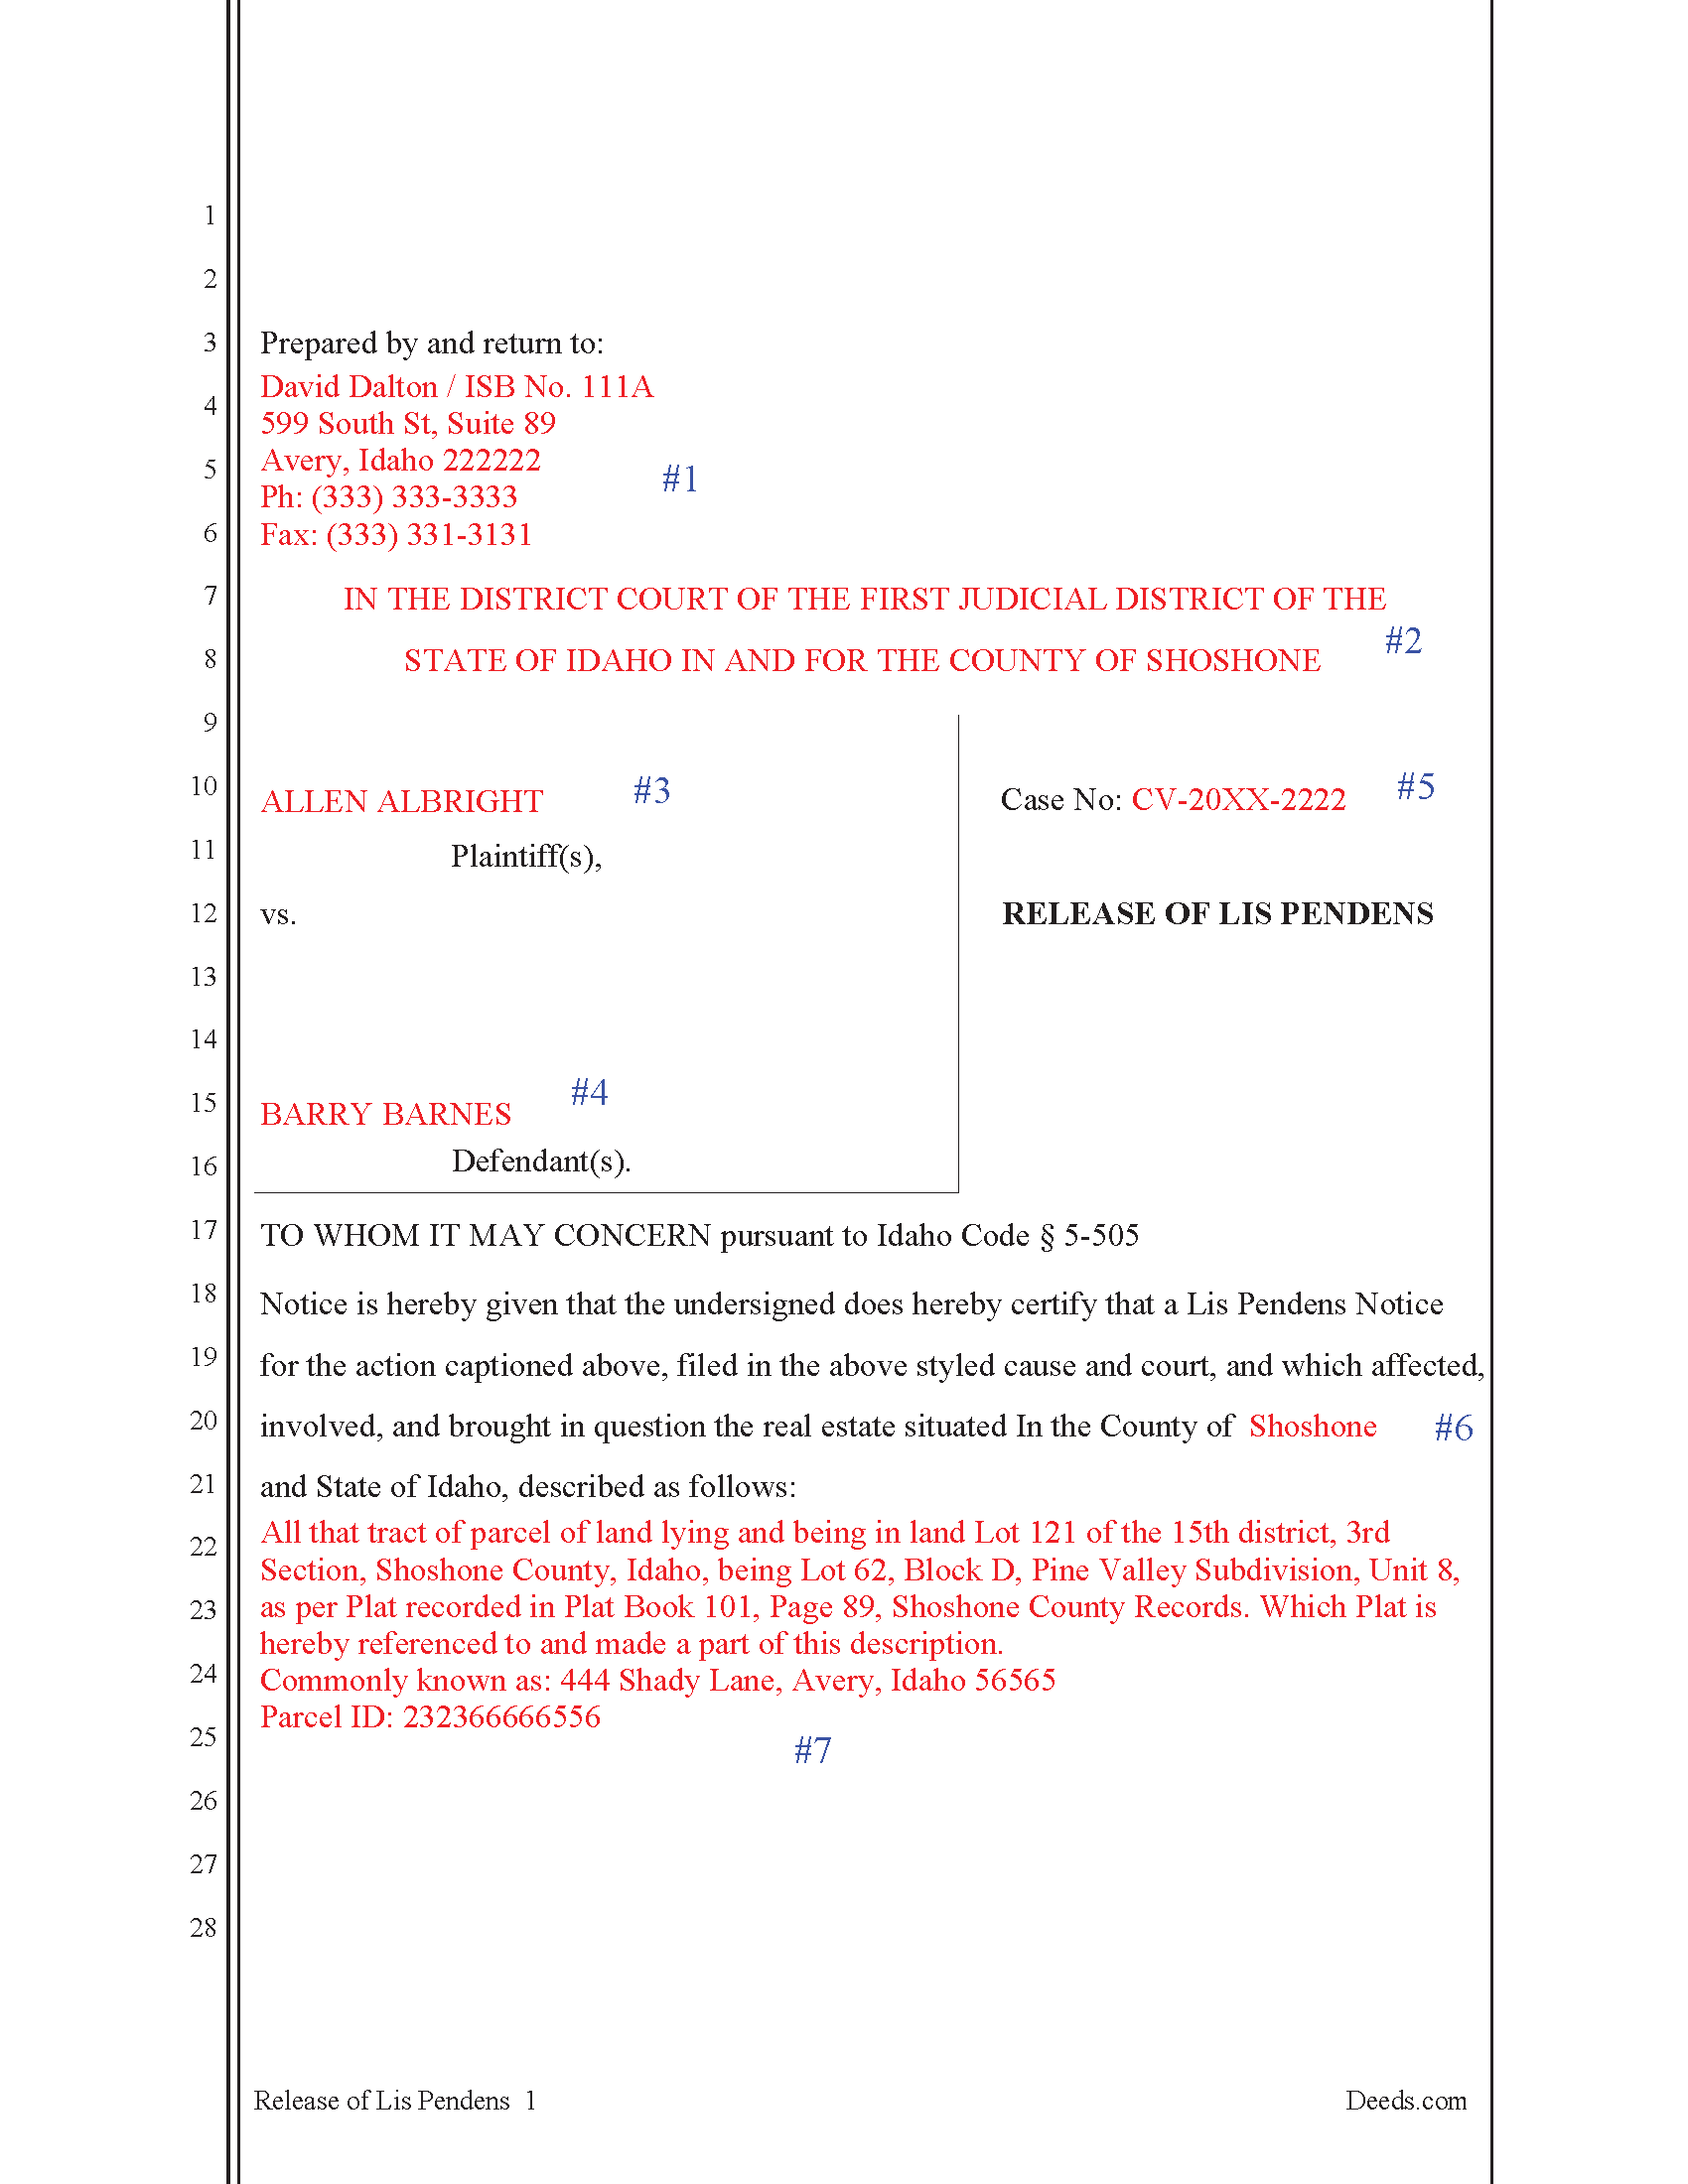 Completed Example of the Release of Lis Pendens document